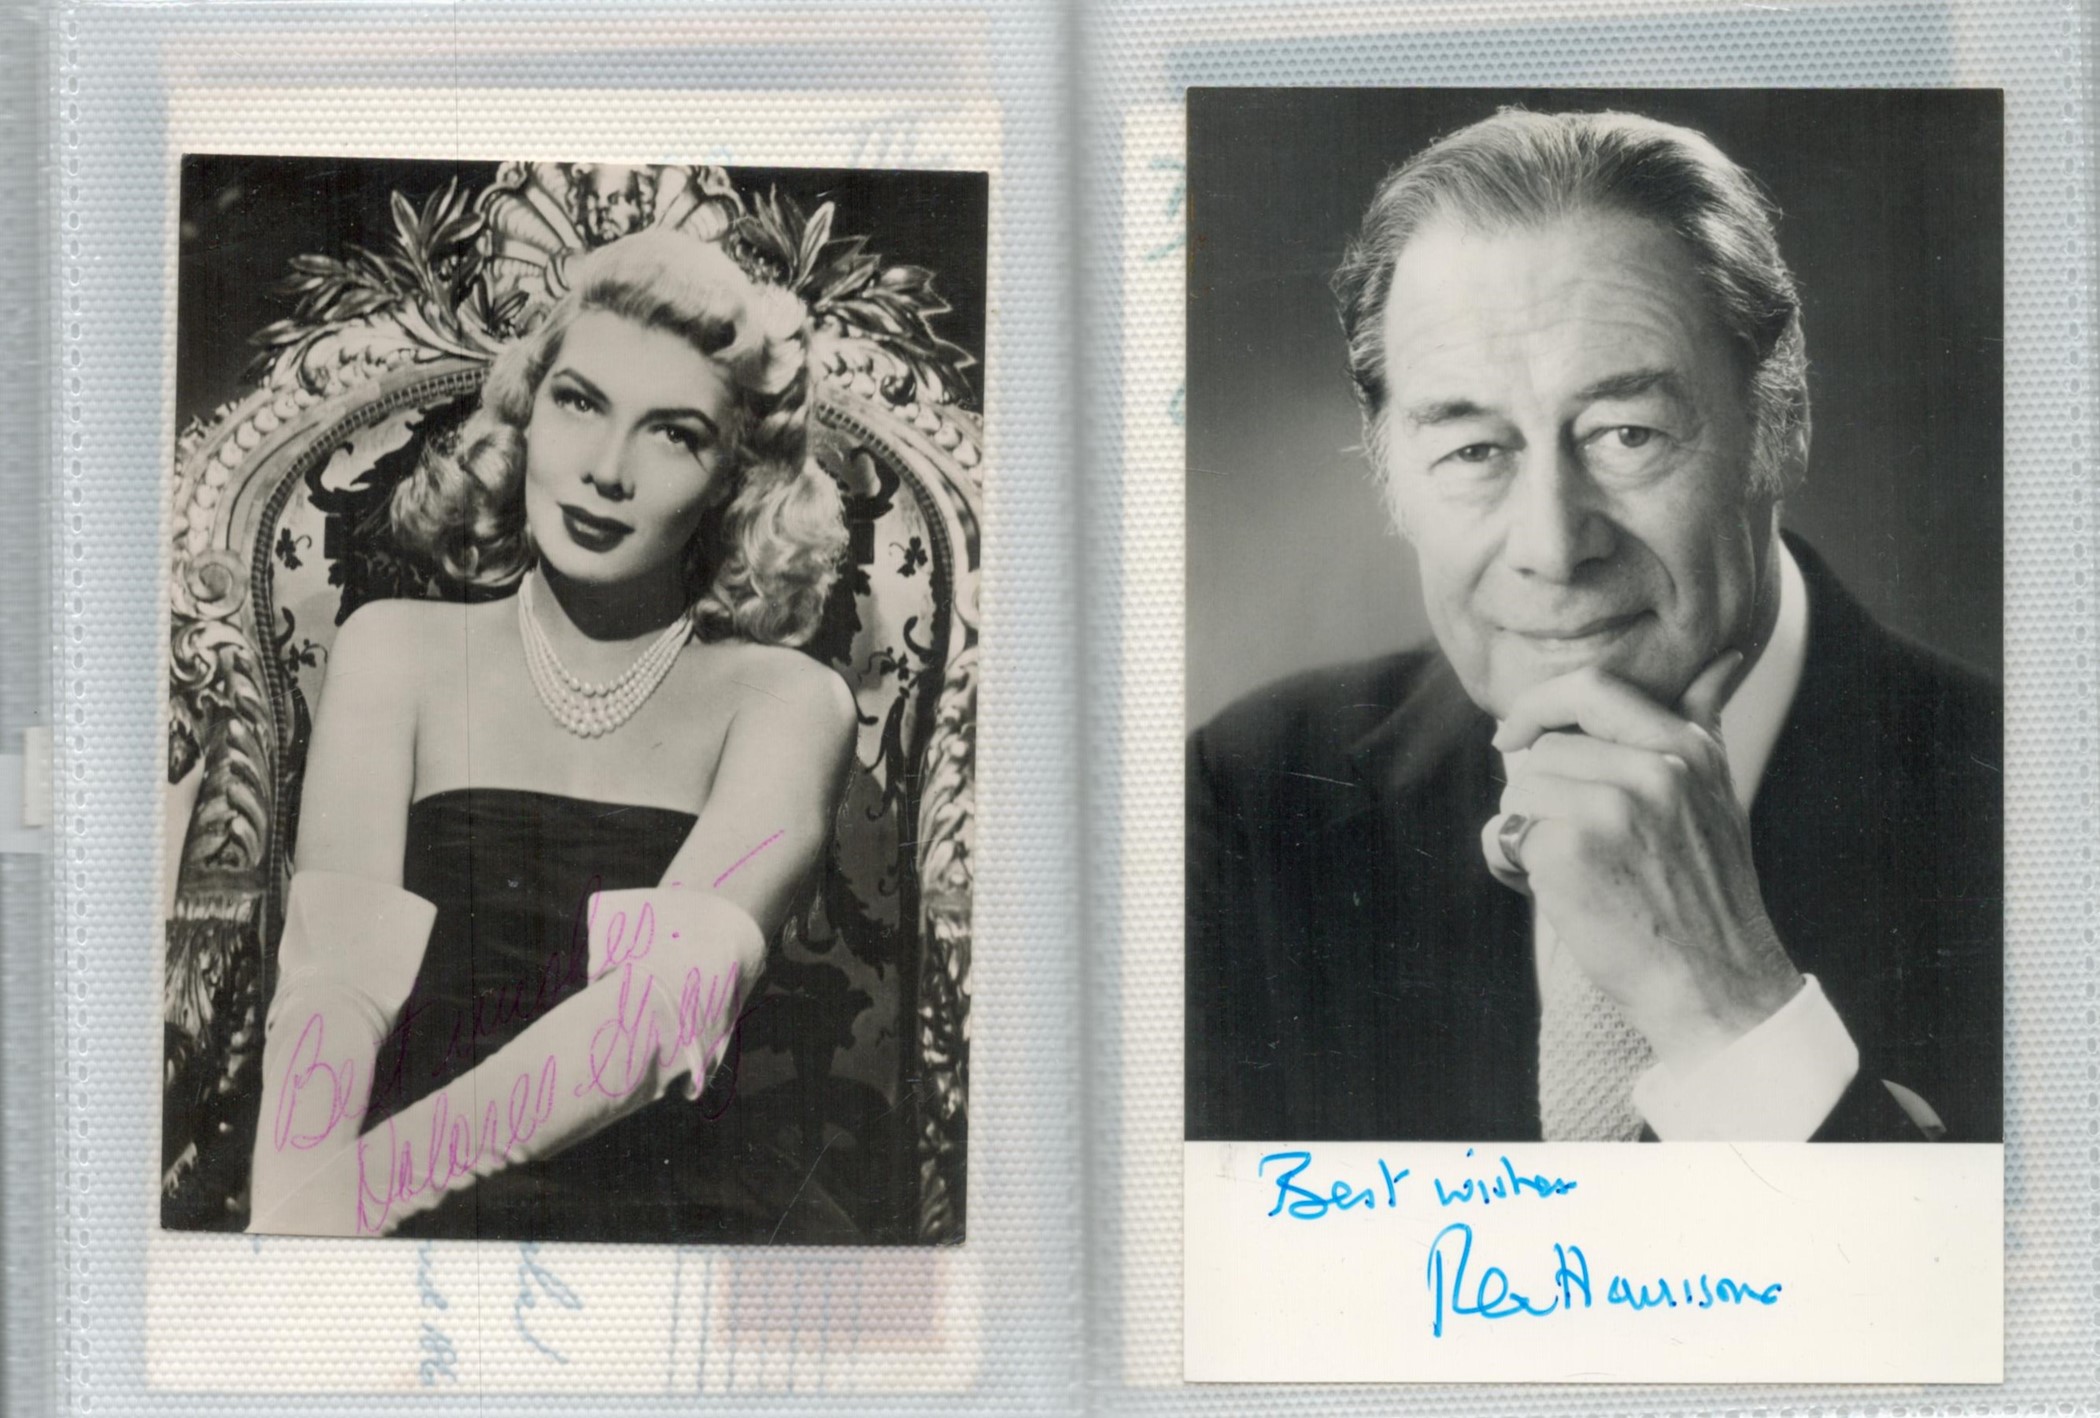 TV And Film Collection of 41 Signed Small Photos Housed in an Aged Album. Signatures include Carol - Image 3 of 3